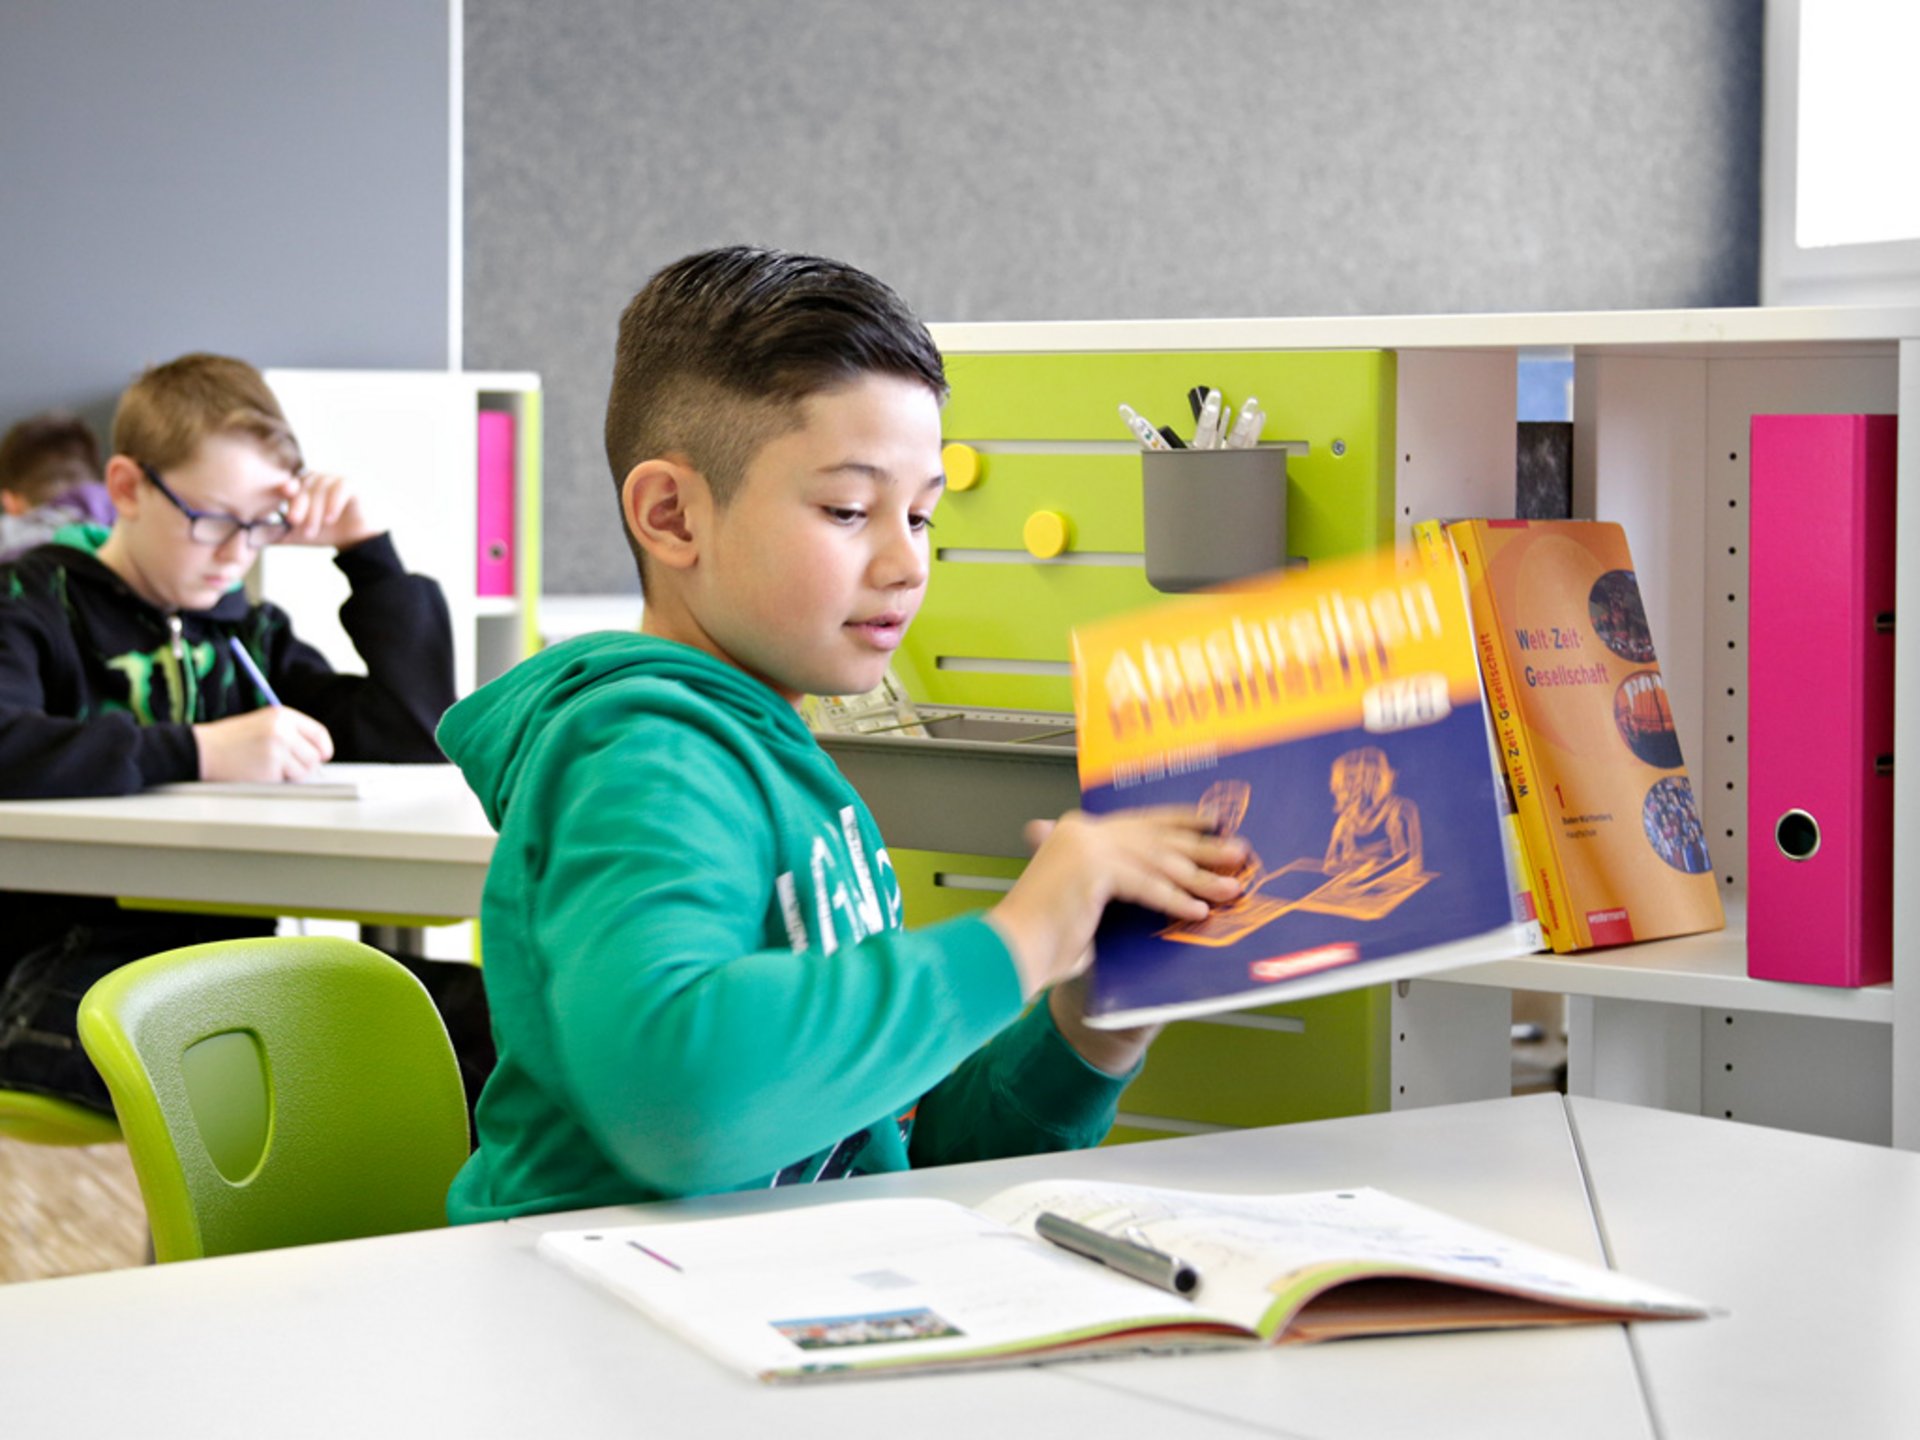 Image: Learning furniture for flexible learning